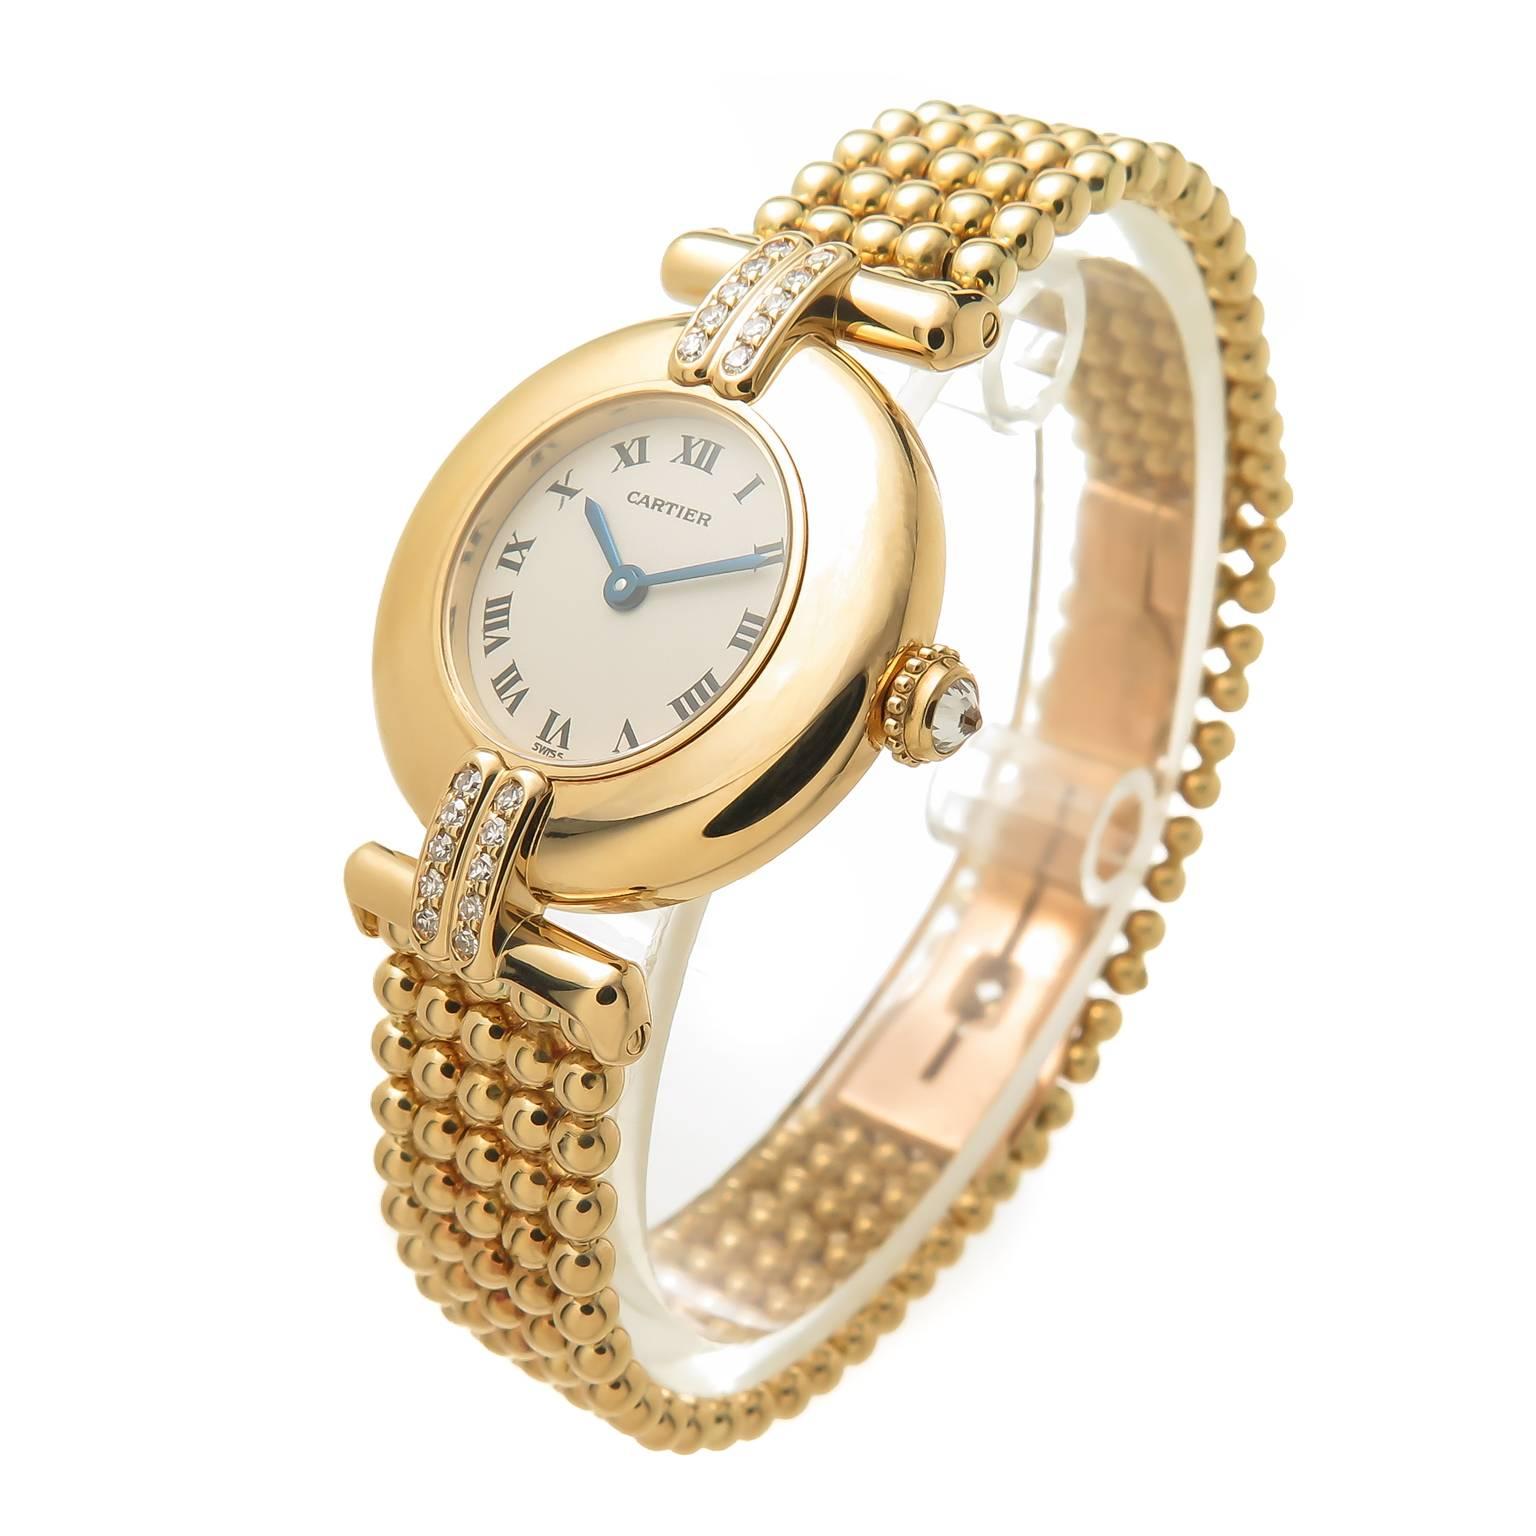 Circa 2000 Cartier Rivoli Collection 18K Yellow Gold ladies Wrist Watch, 24 MM Water Resistant case, Quartz Movement, White Dial with Black Roman Numerals, 2 rows of Round Brilliant cut Diamonds on either side of the case and a diamond set crown.